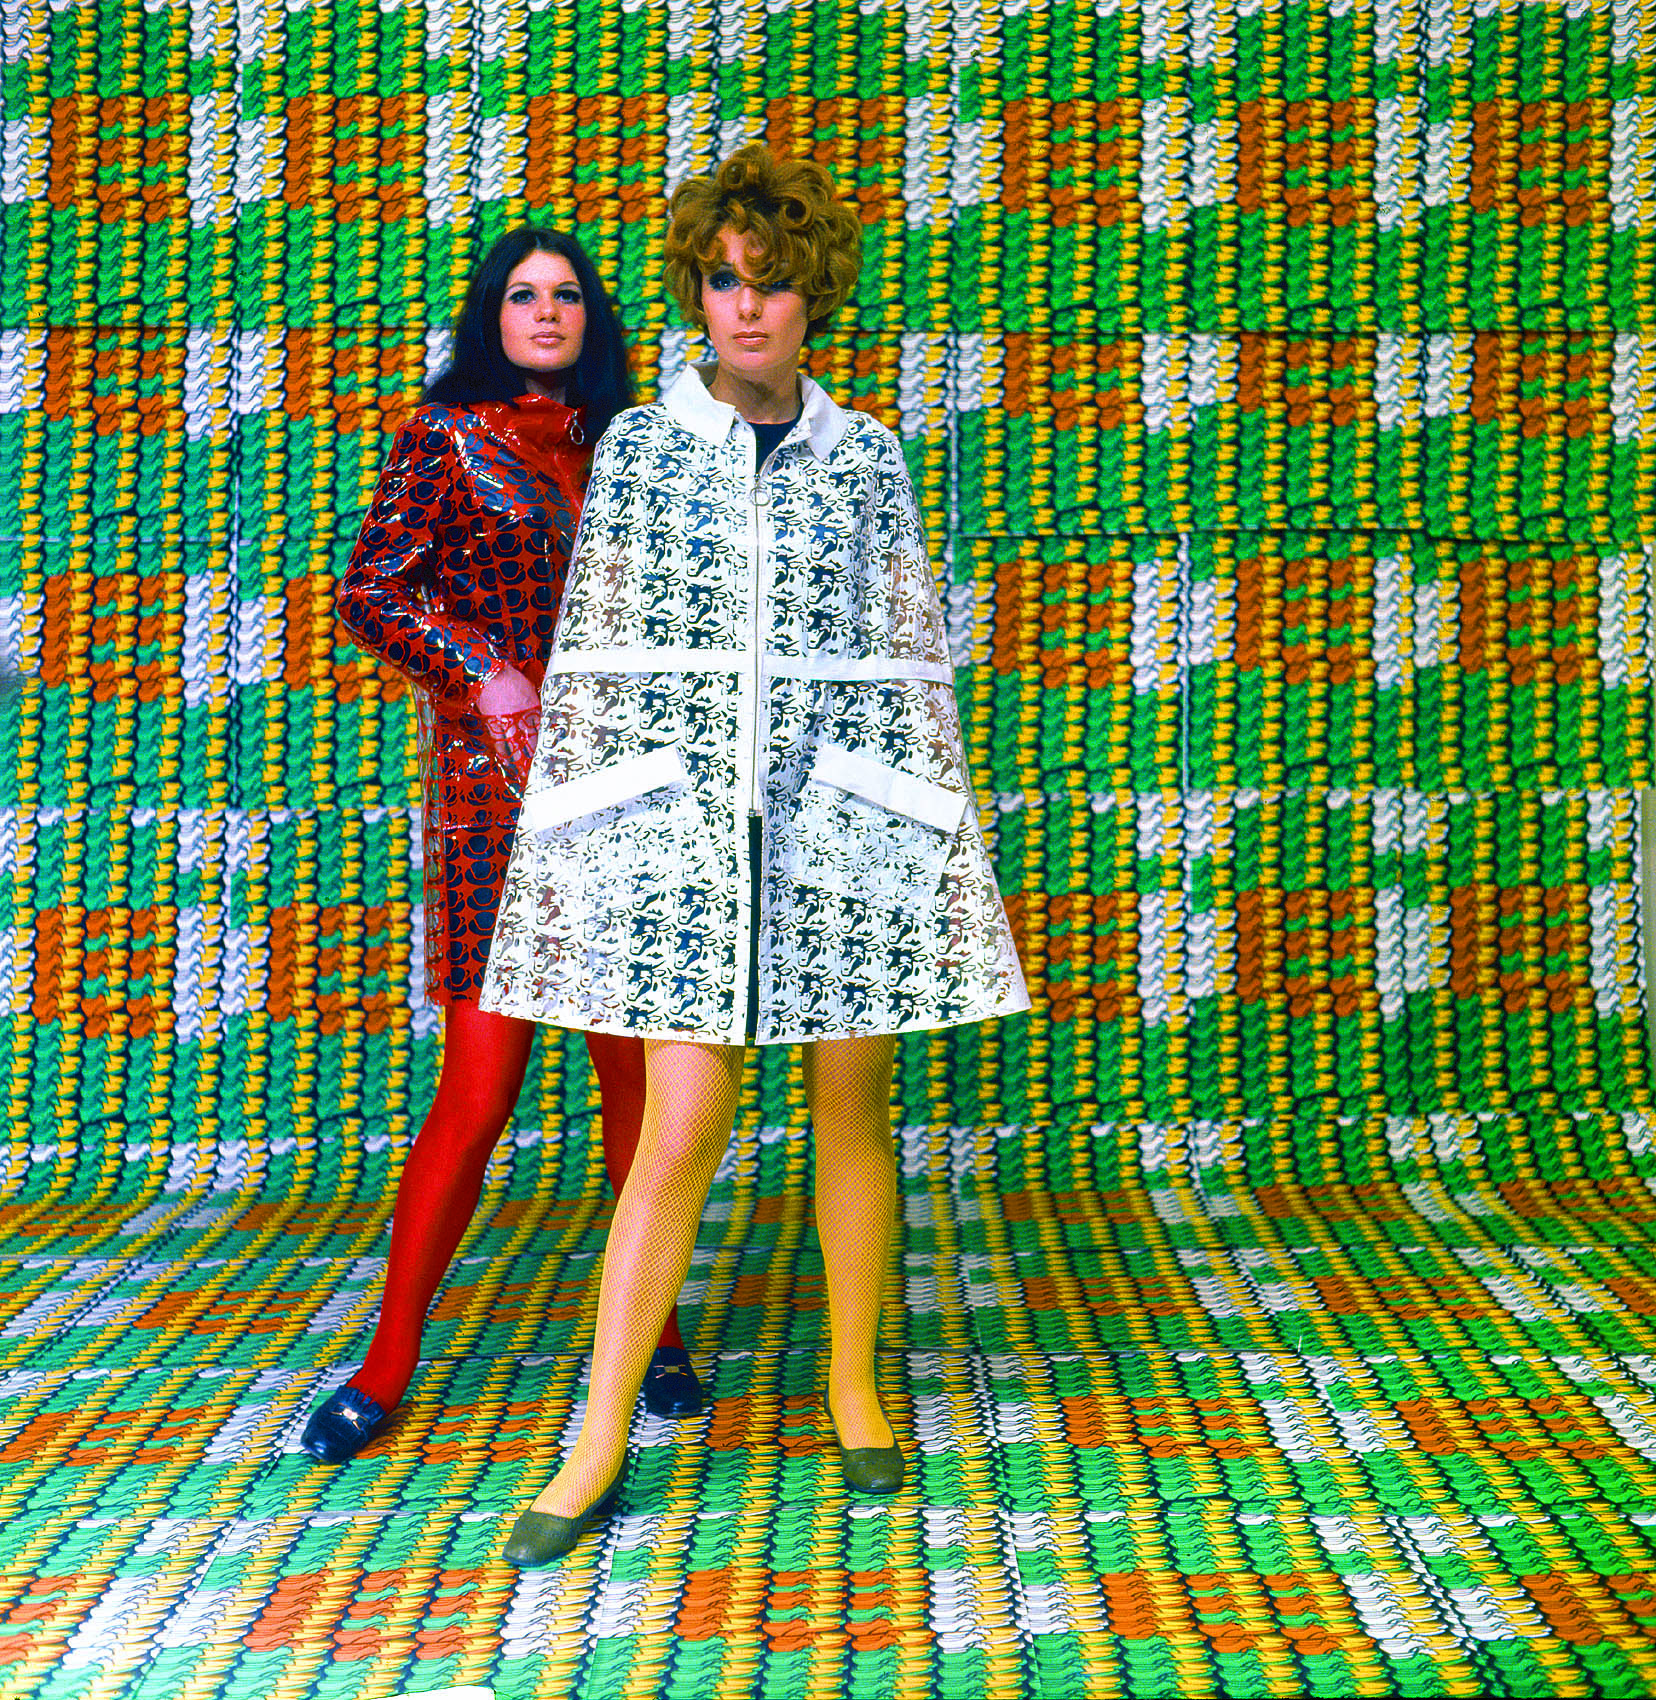 Models wearing coats designed by Lukowski + Ohanian with textile pattern by Thomas Bayrle,